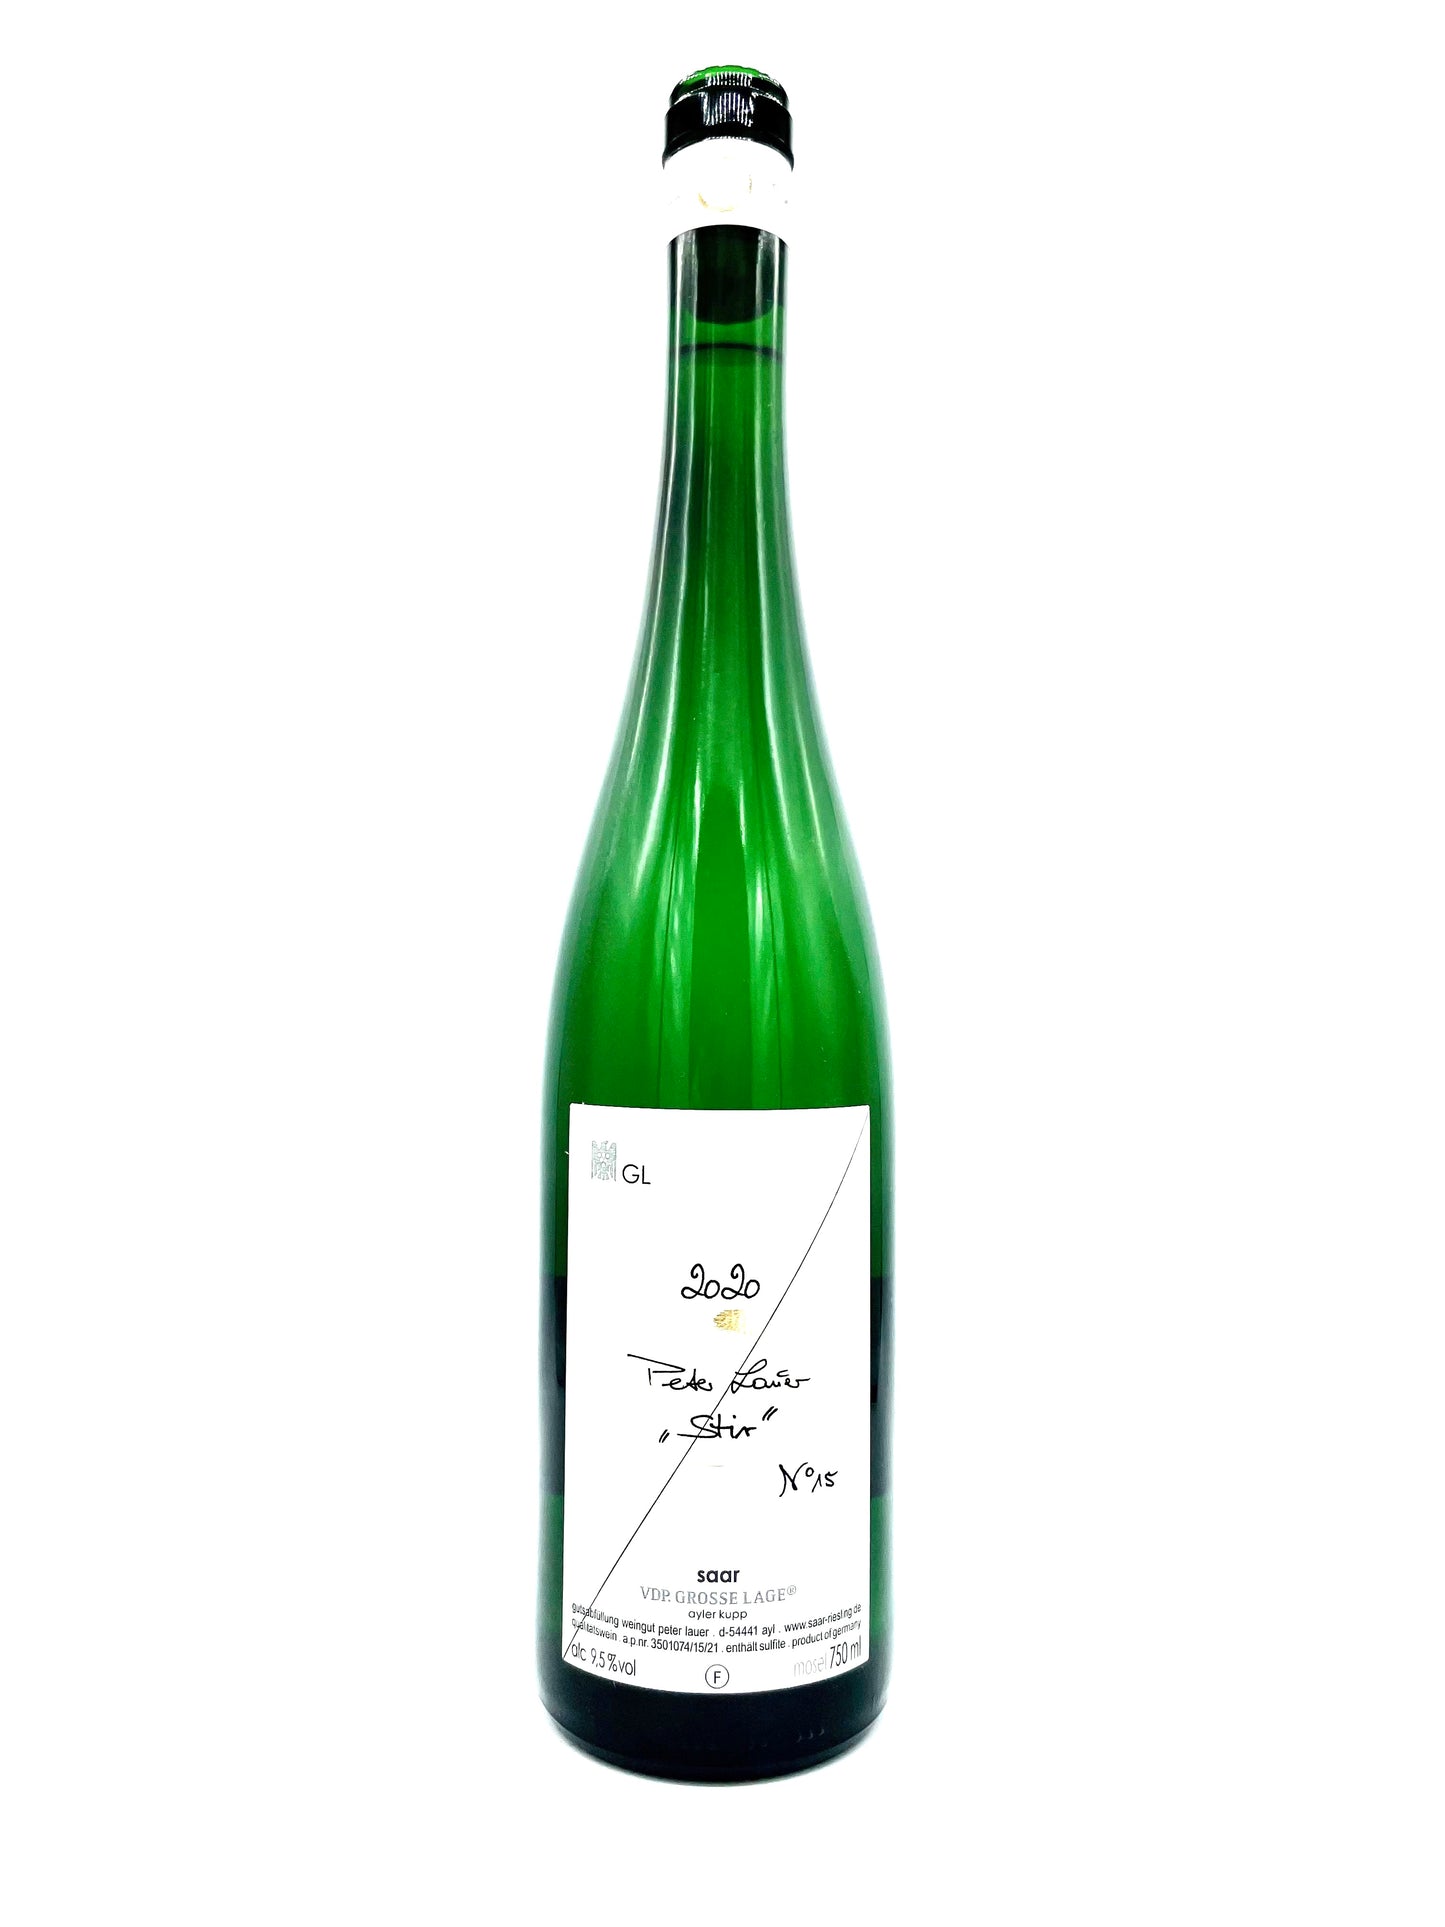 Peter Lauer 'Stirn, Fass 15' Riesling 2020